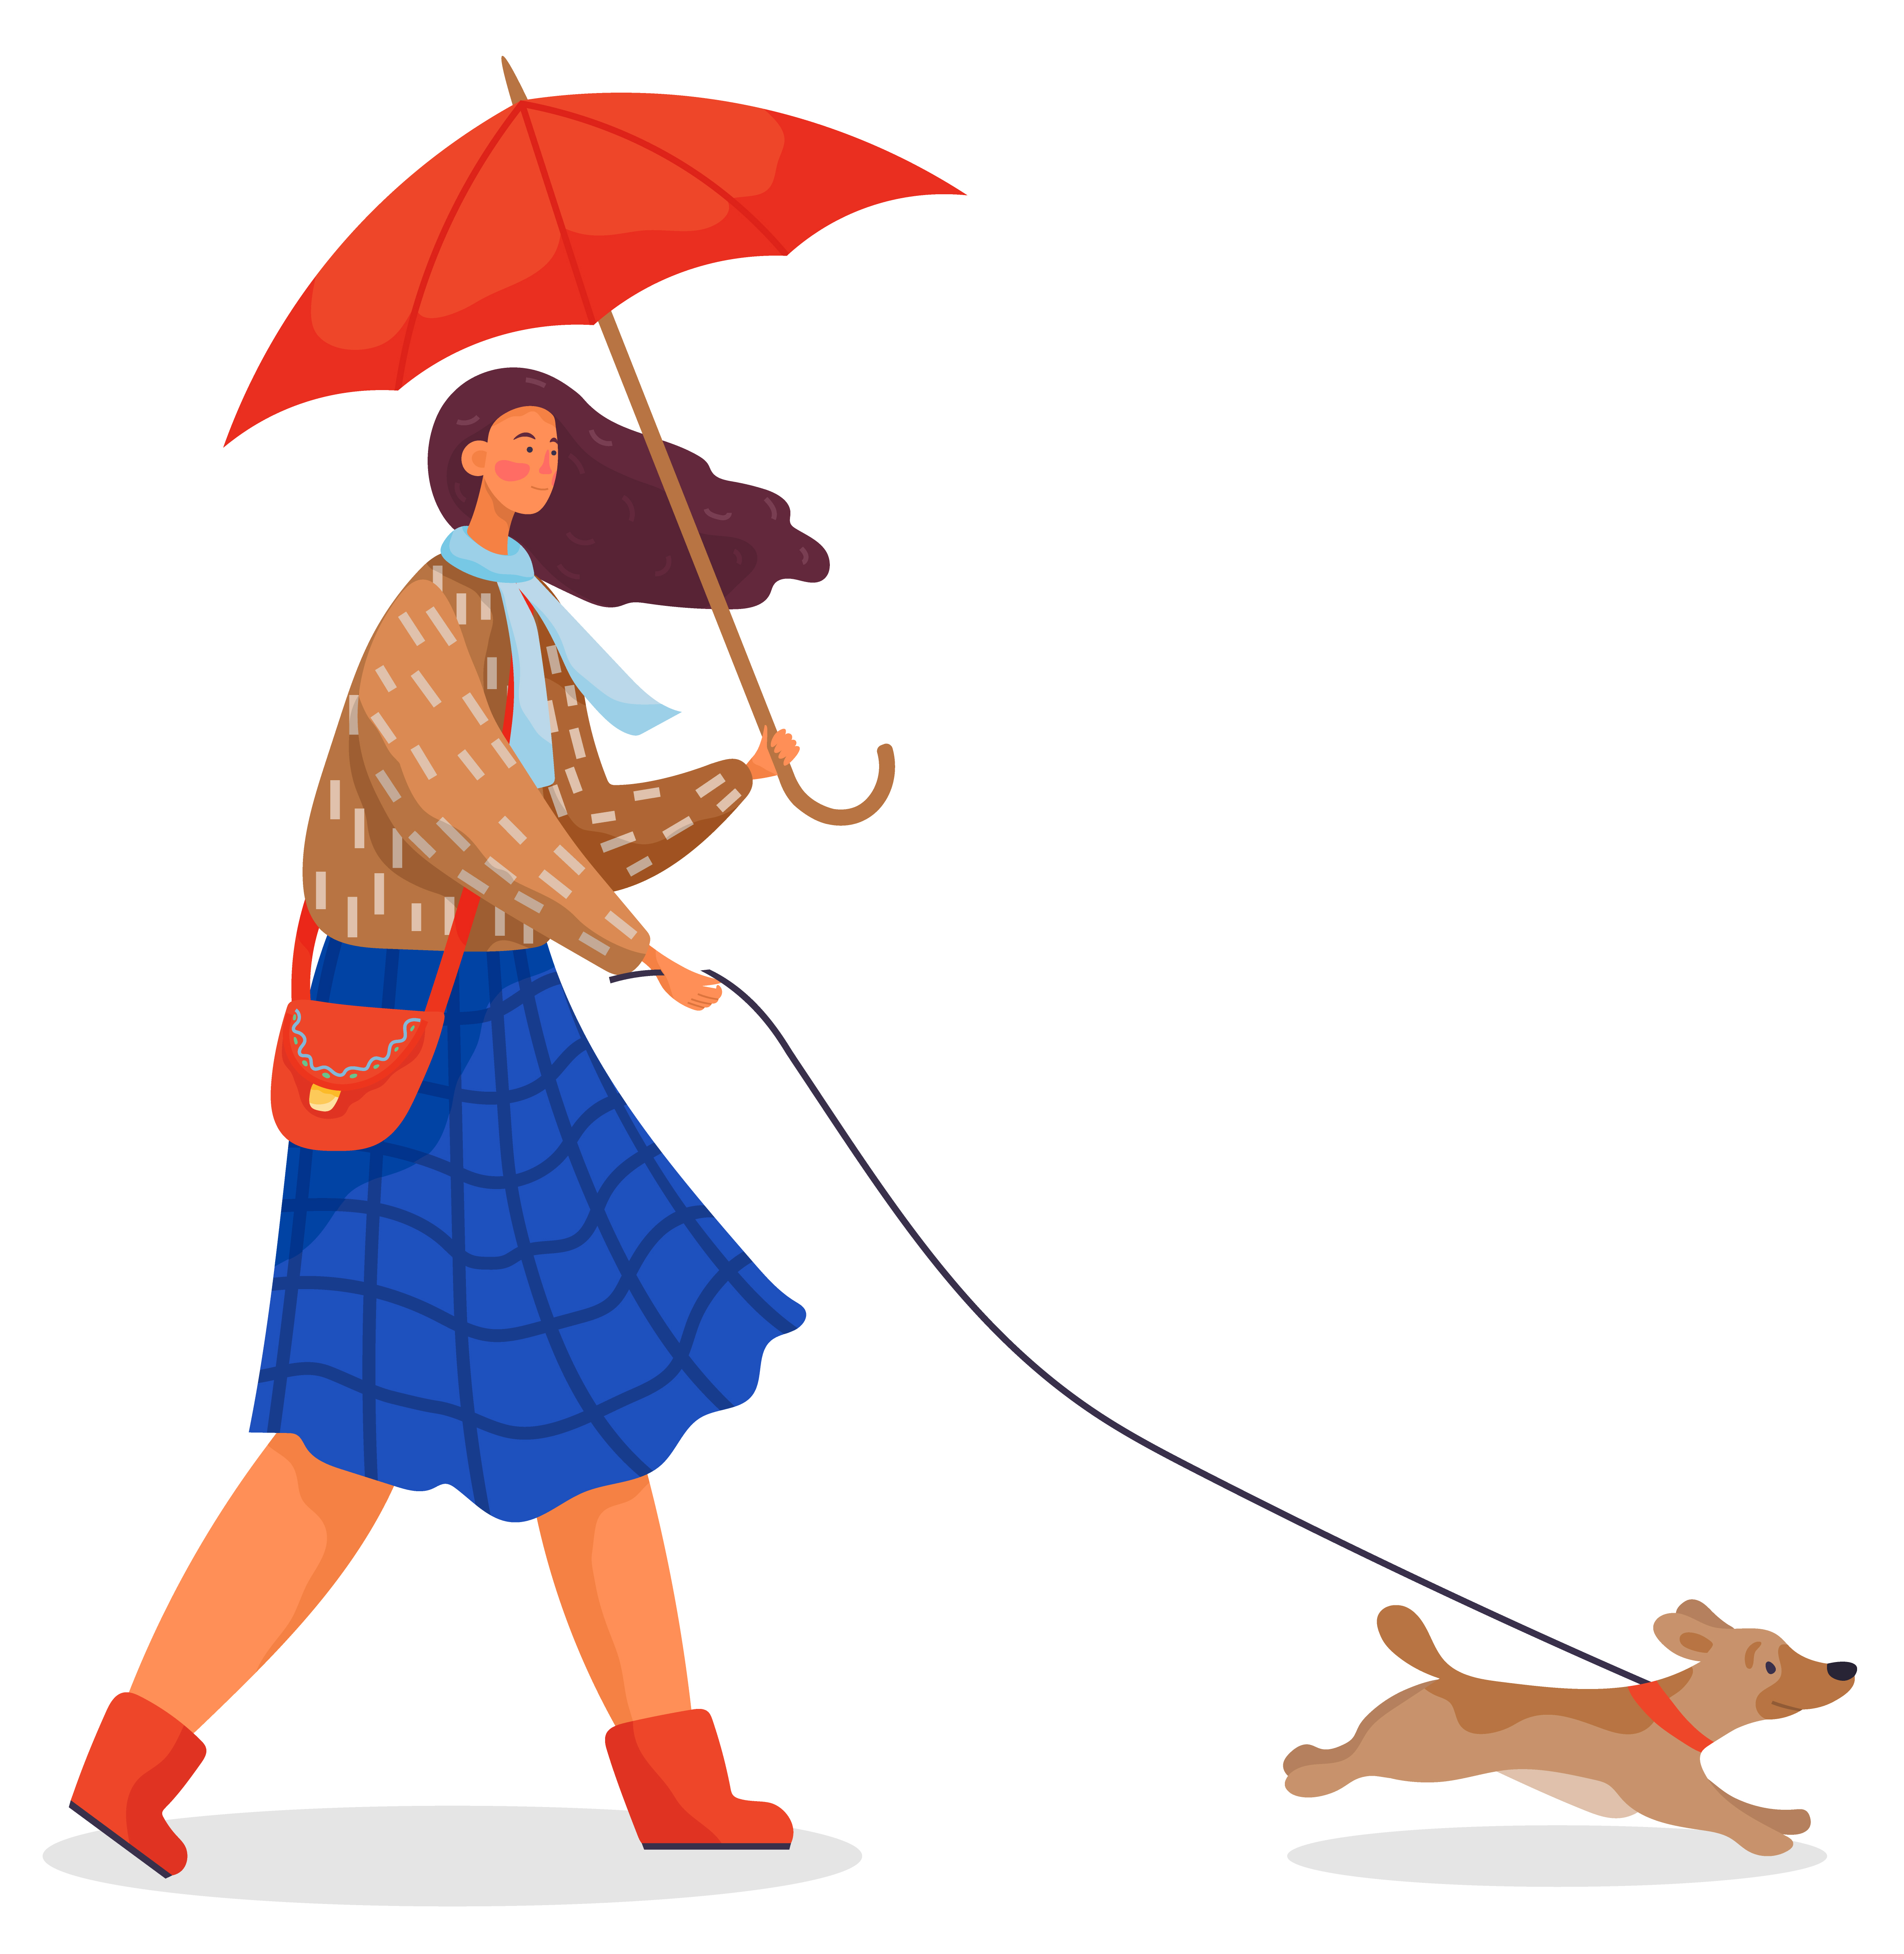 Young woman walk with her pet, puppy in park. Woman stroll with active dog on leash. Person dressed in warm clothes like scarf, coat and carry umbrella. Vector illustration of walking in flat style. Woman Walk with Dog in Autumn Park, Domestic Pet